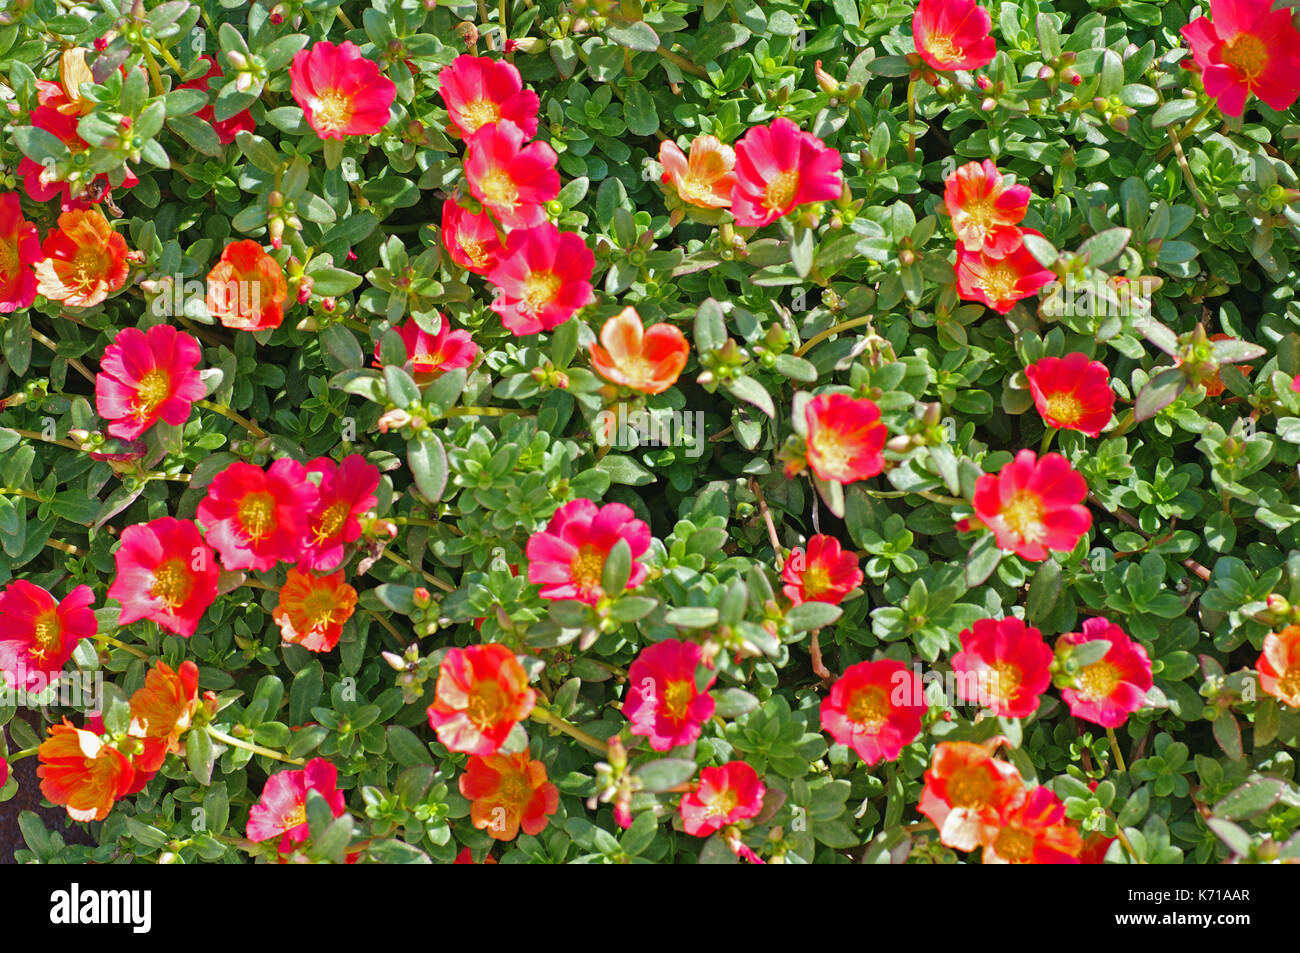 This Is Portulaca Grandiflora The Moss Rose Or Rose Moss Family Stock Photo Alamy